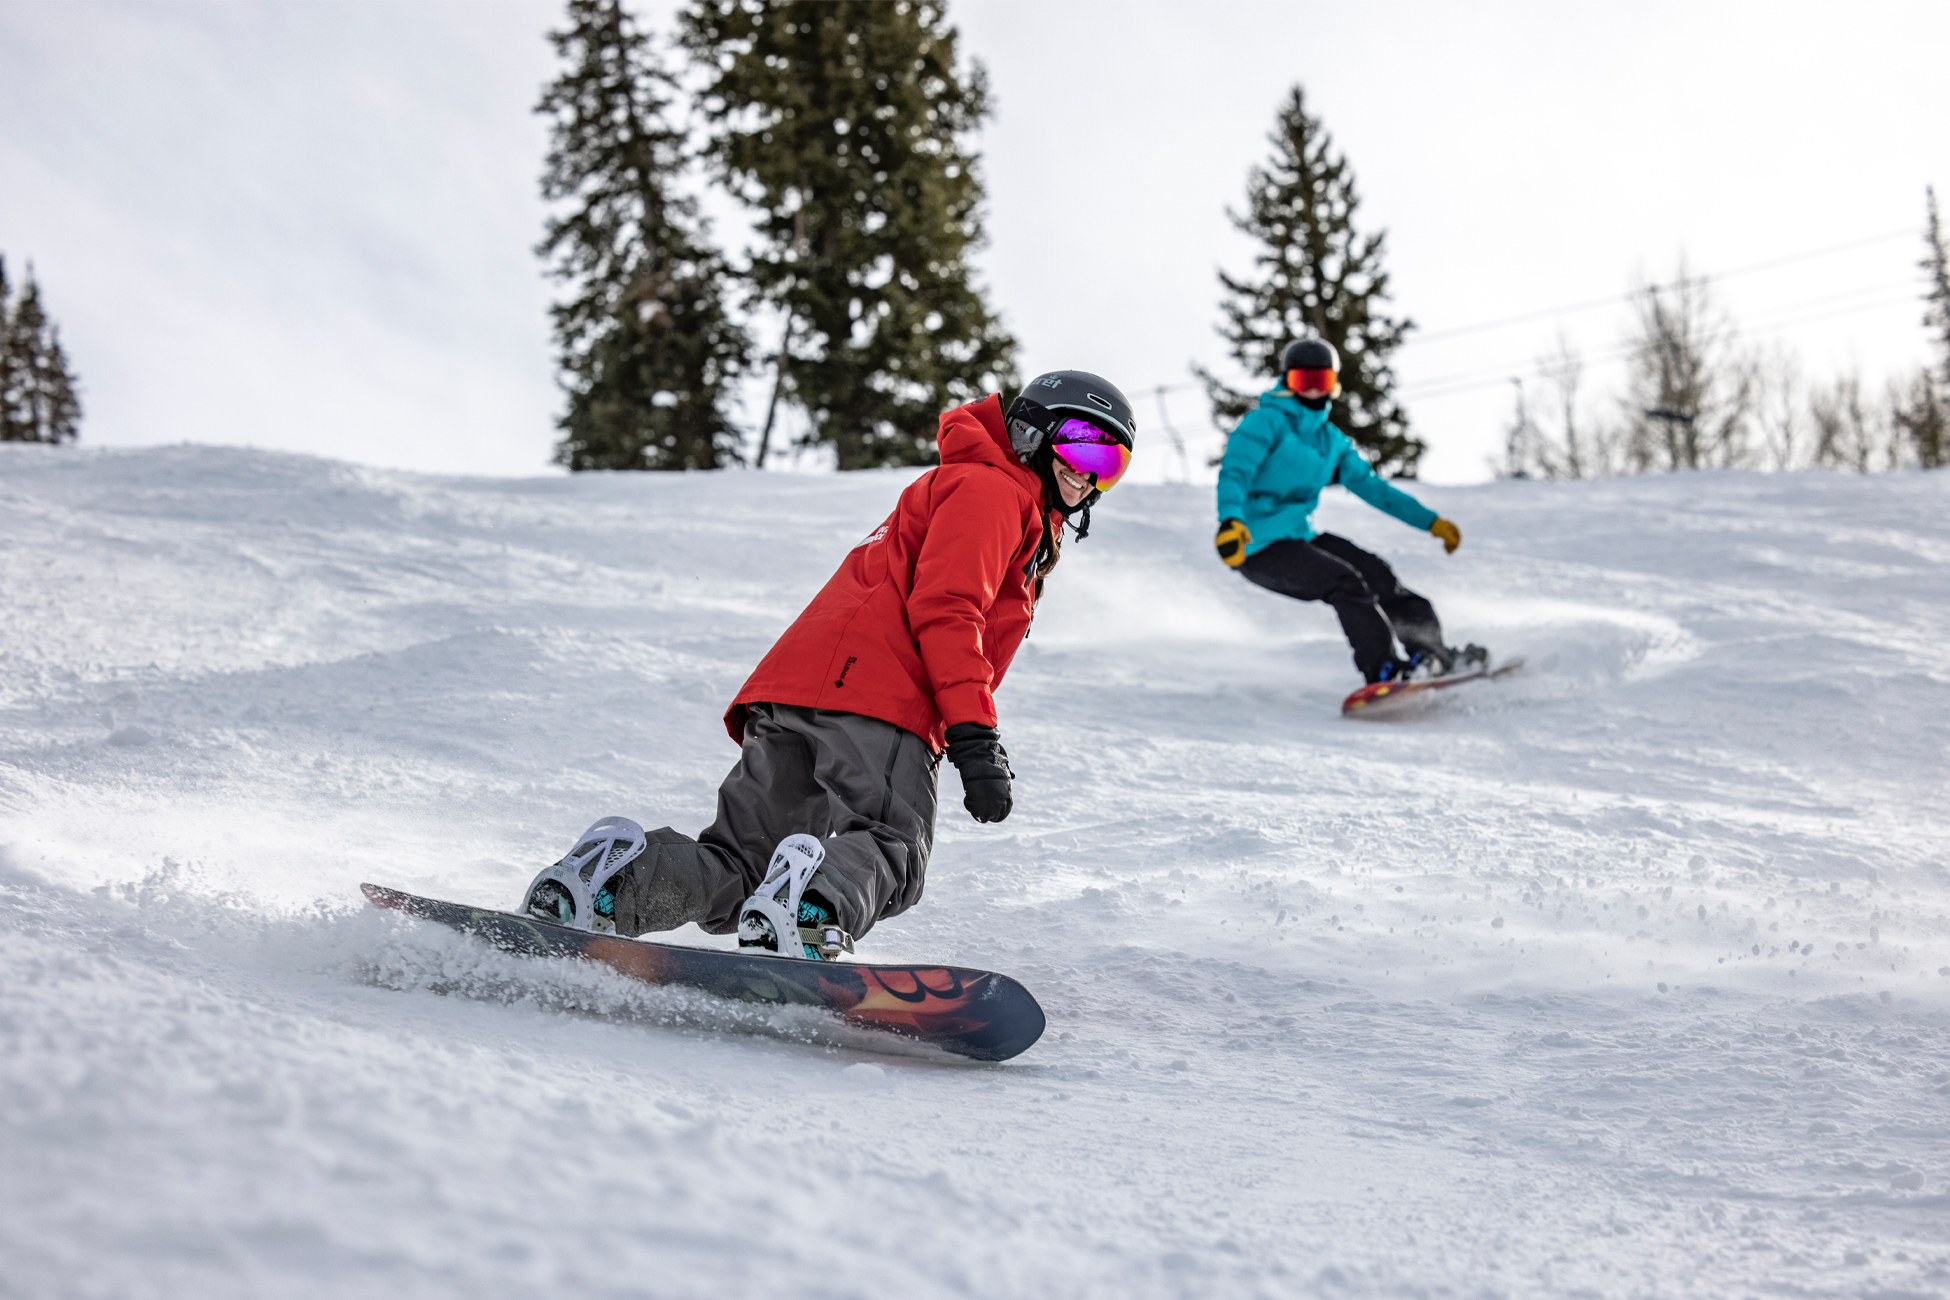 Adult group lessons and multi-week ski programs including mid-week ski and snowboard groups